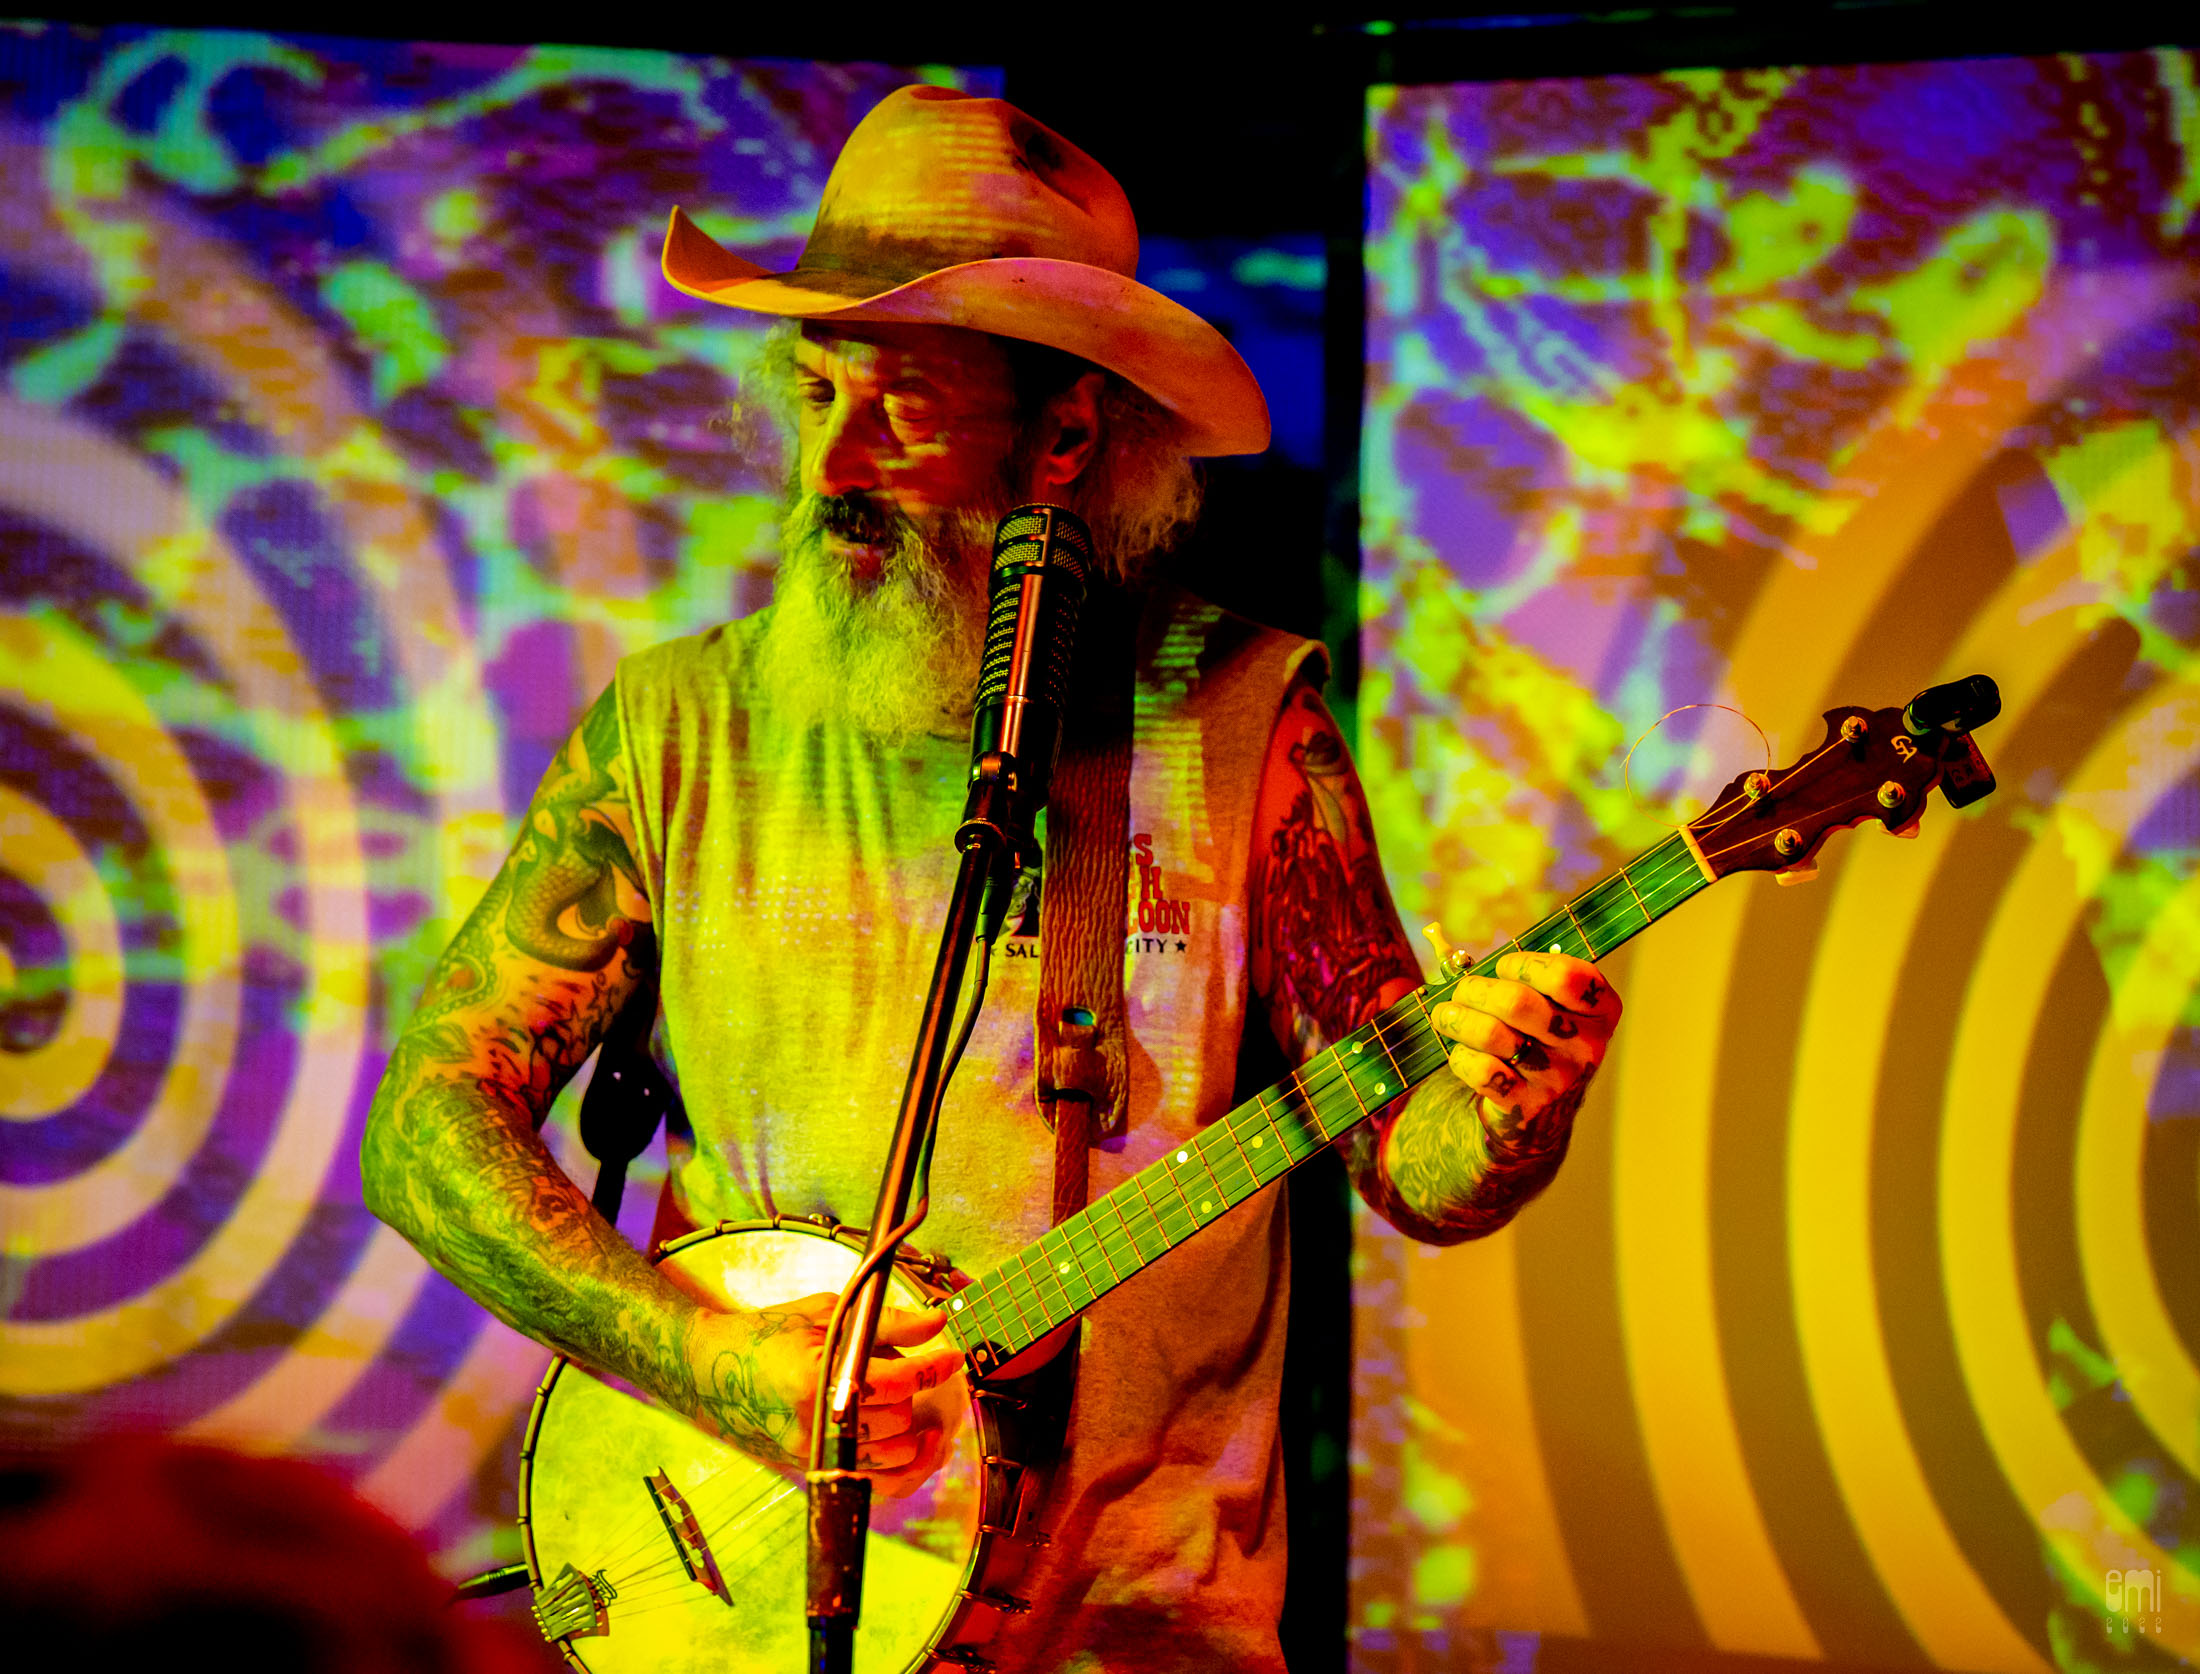 20220723 JD Pinkus with Mad Alchemy Liquid Light Show at RippleFest Texas 2022, The Far Out Lounge, Austin TX. photo by emi